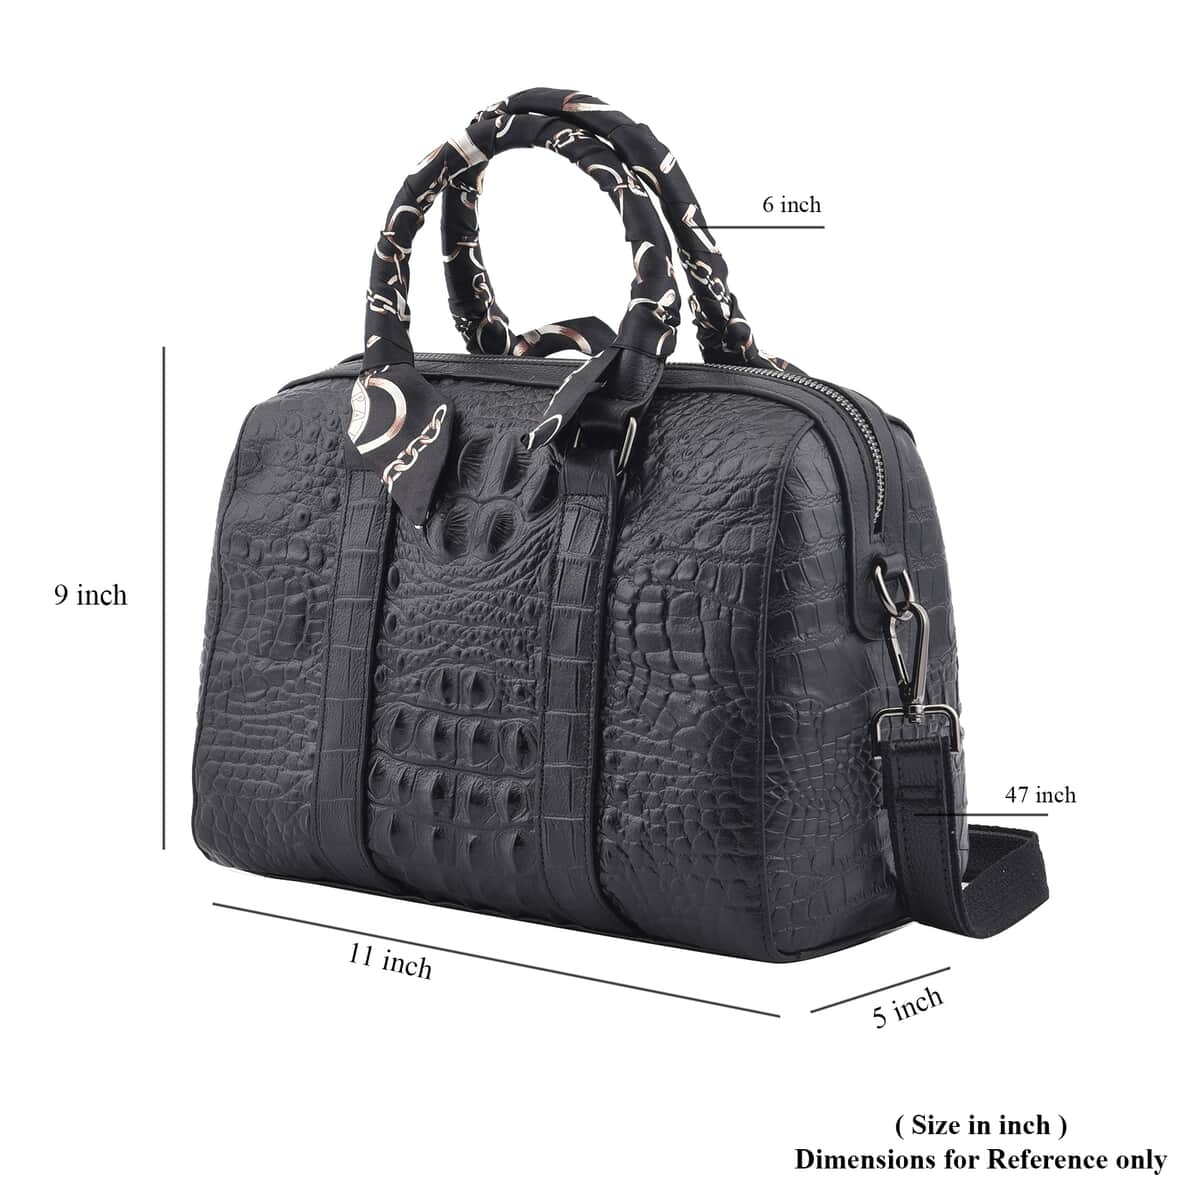 Black Crocodile Embossed Pattern Genuine Leather Convertible Bag (11"x5"x9") with Handle Drop and Shoulder Strap image number 4